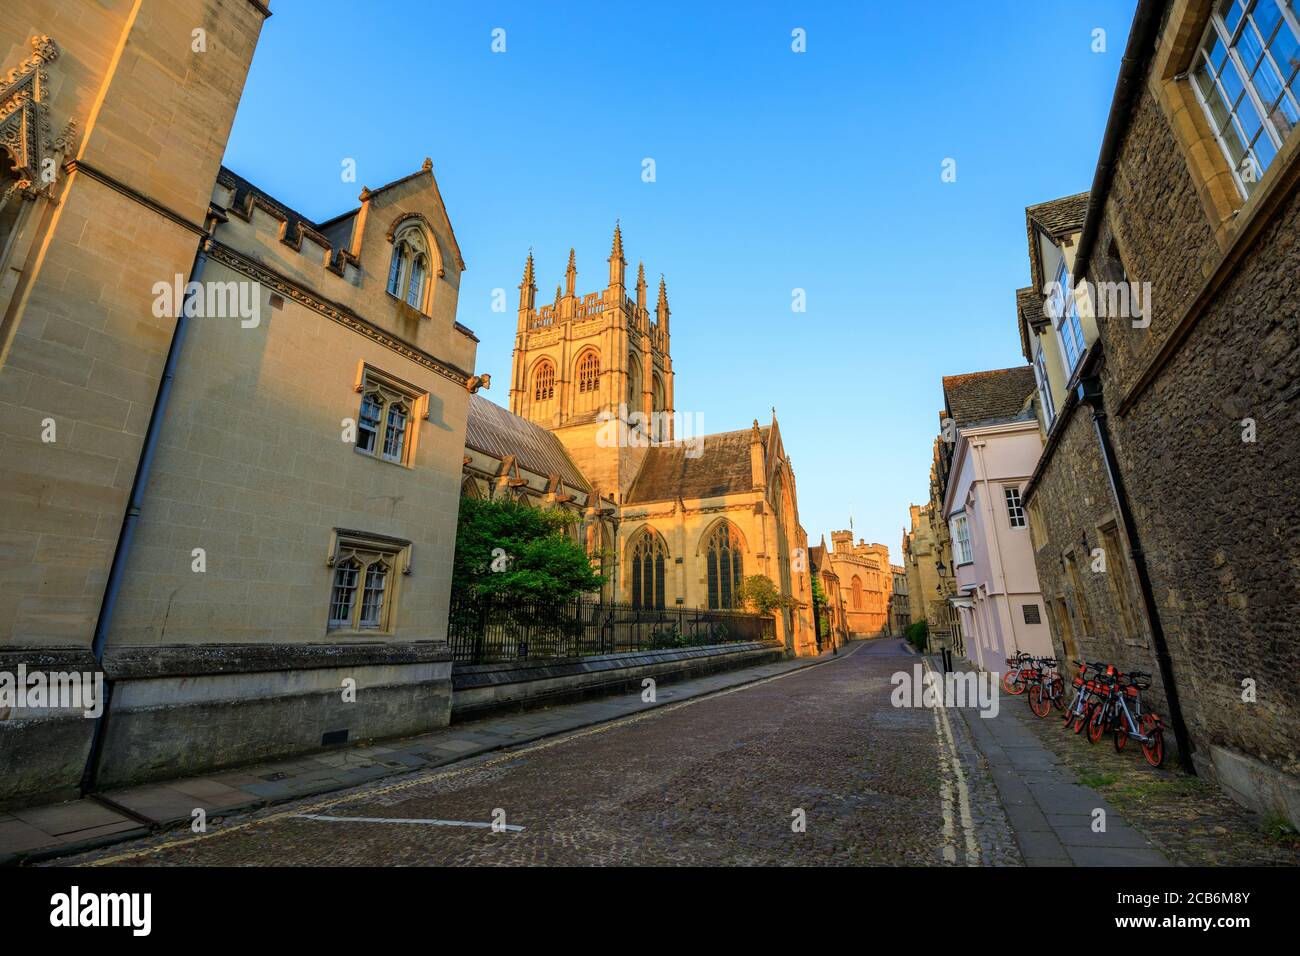 Merton College Chapel, down a side street, in Oxford at sunrise with no people around, early in the morning on a clear day with blue sky. Oxford, Engl Stock Photo